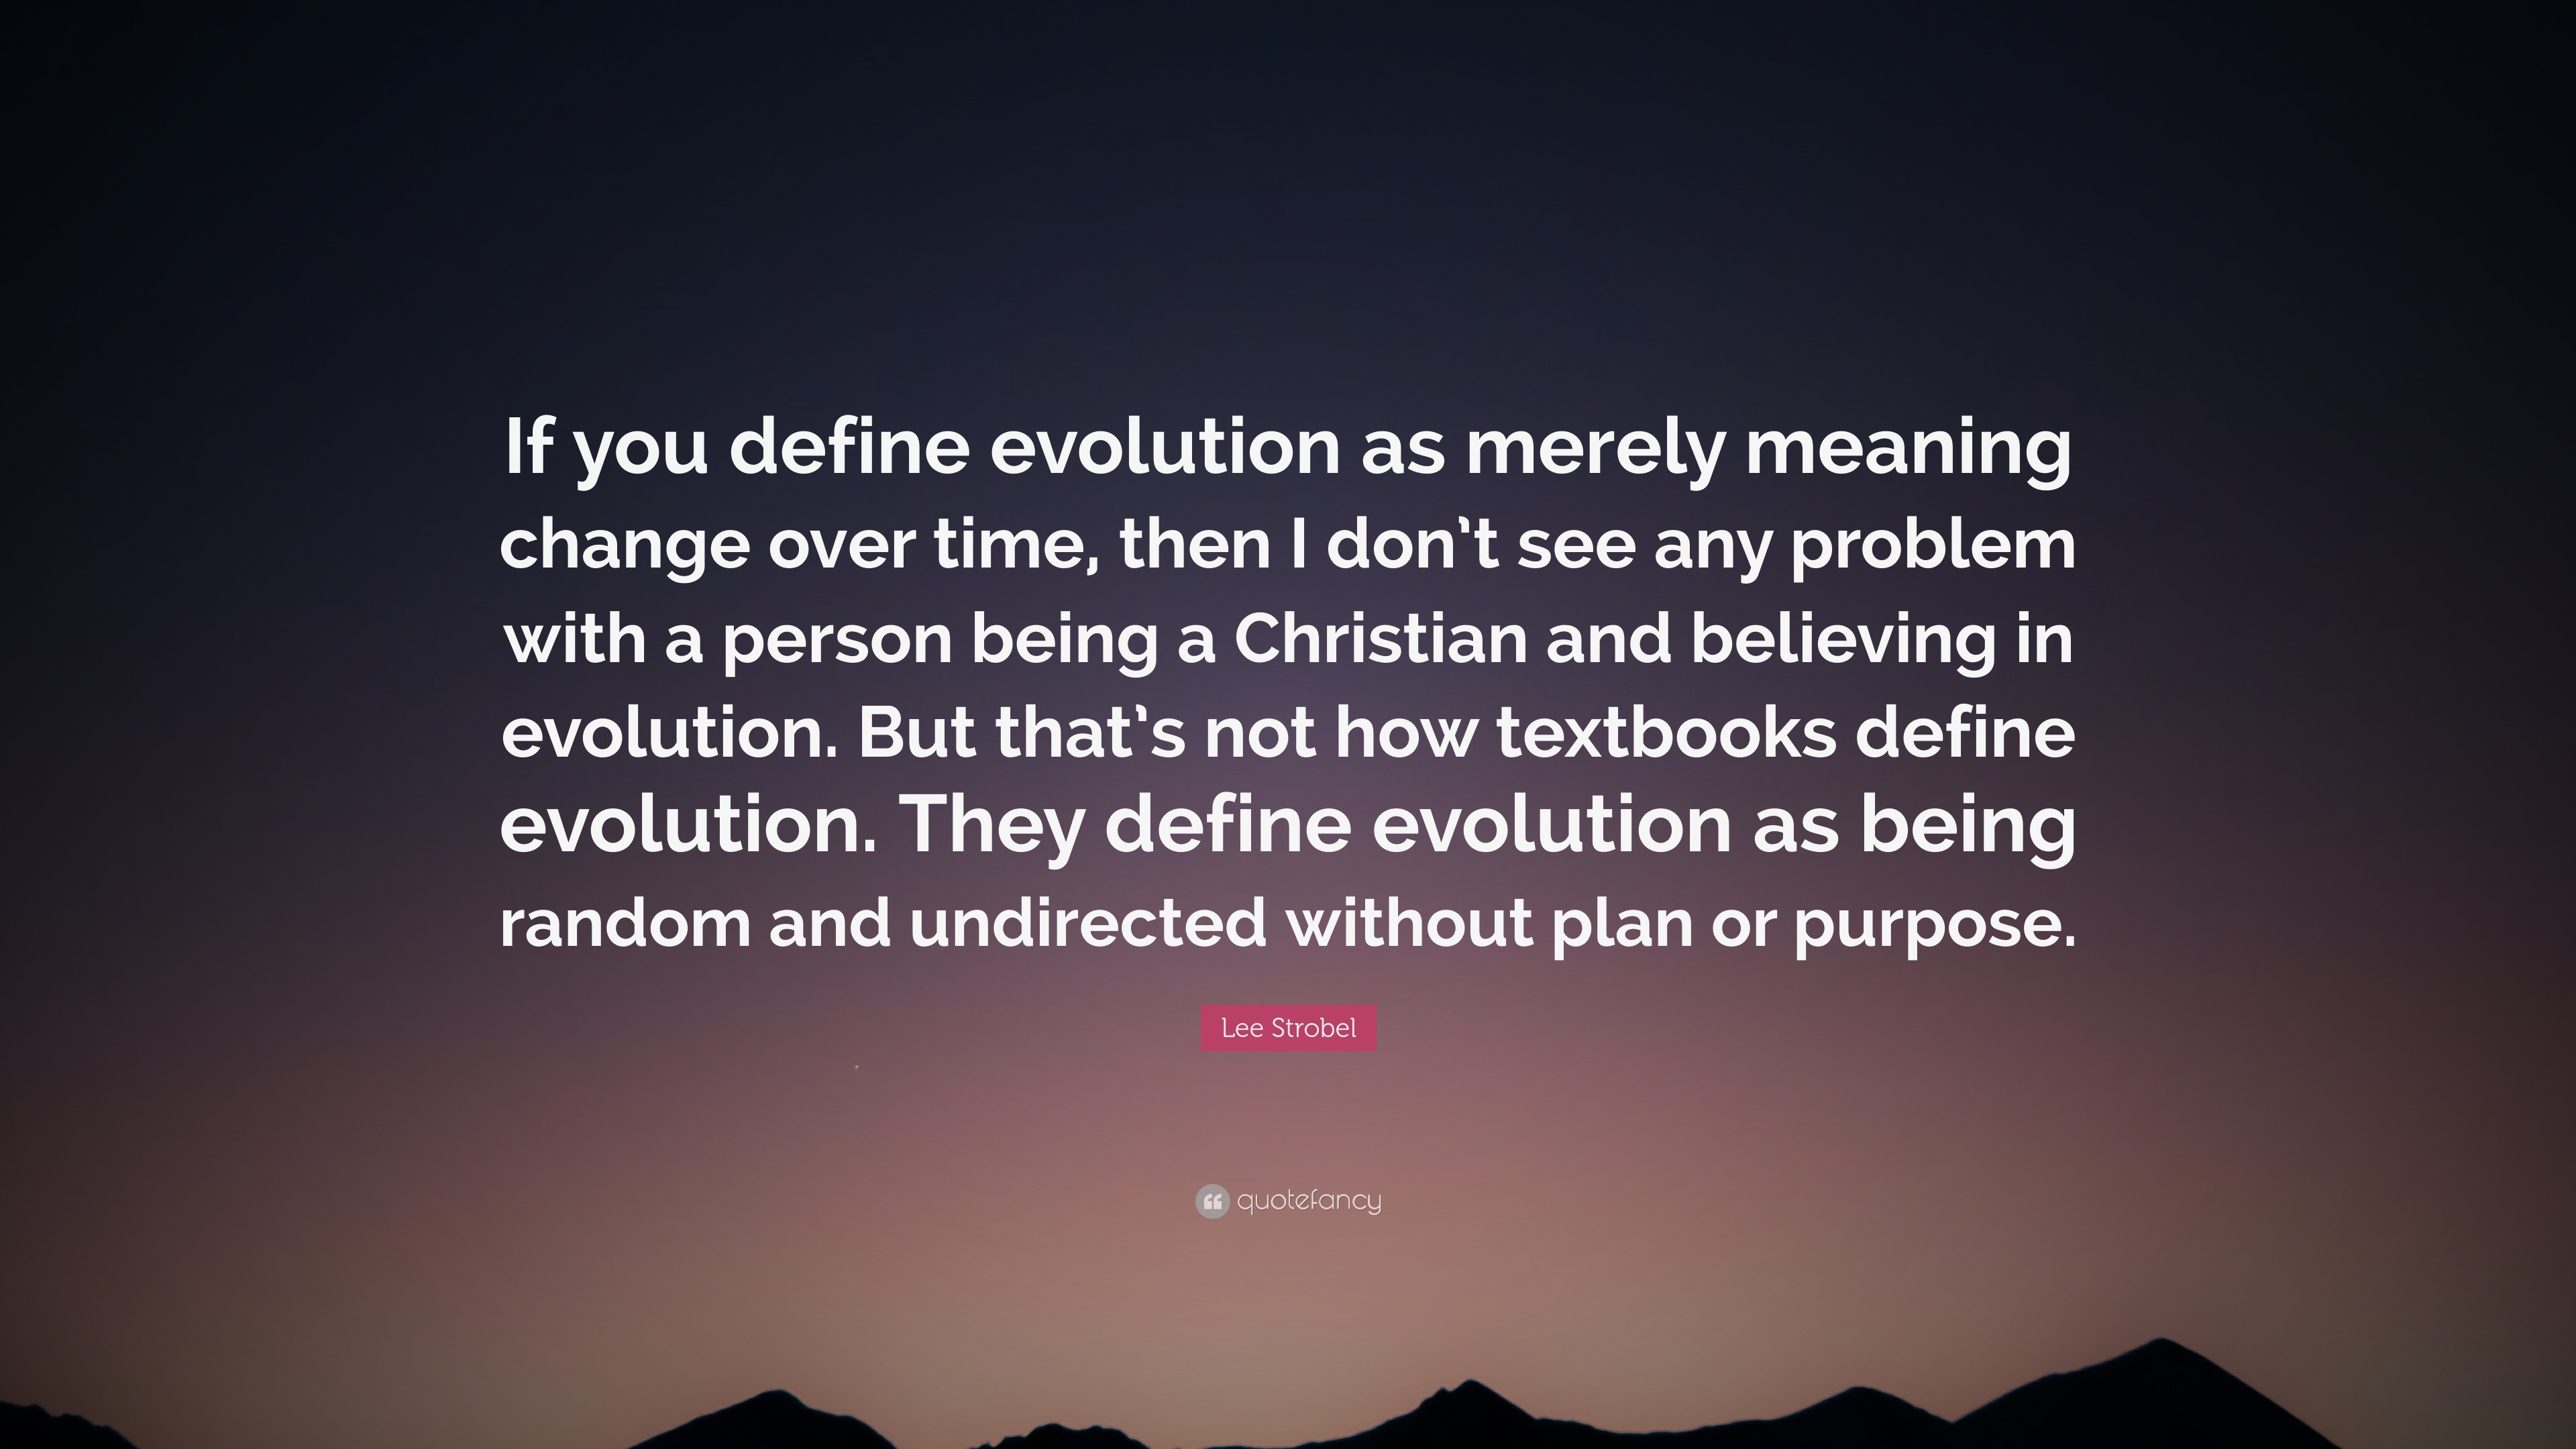 Lee Strobel quote: If you define evolution as merely meaning change over  time